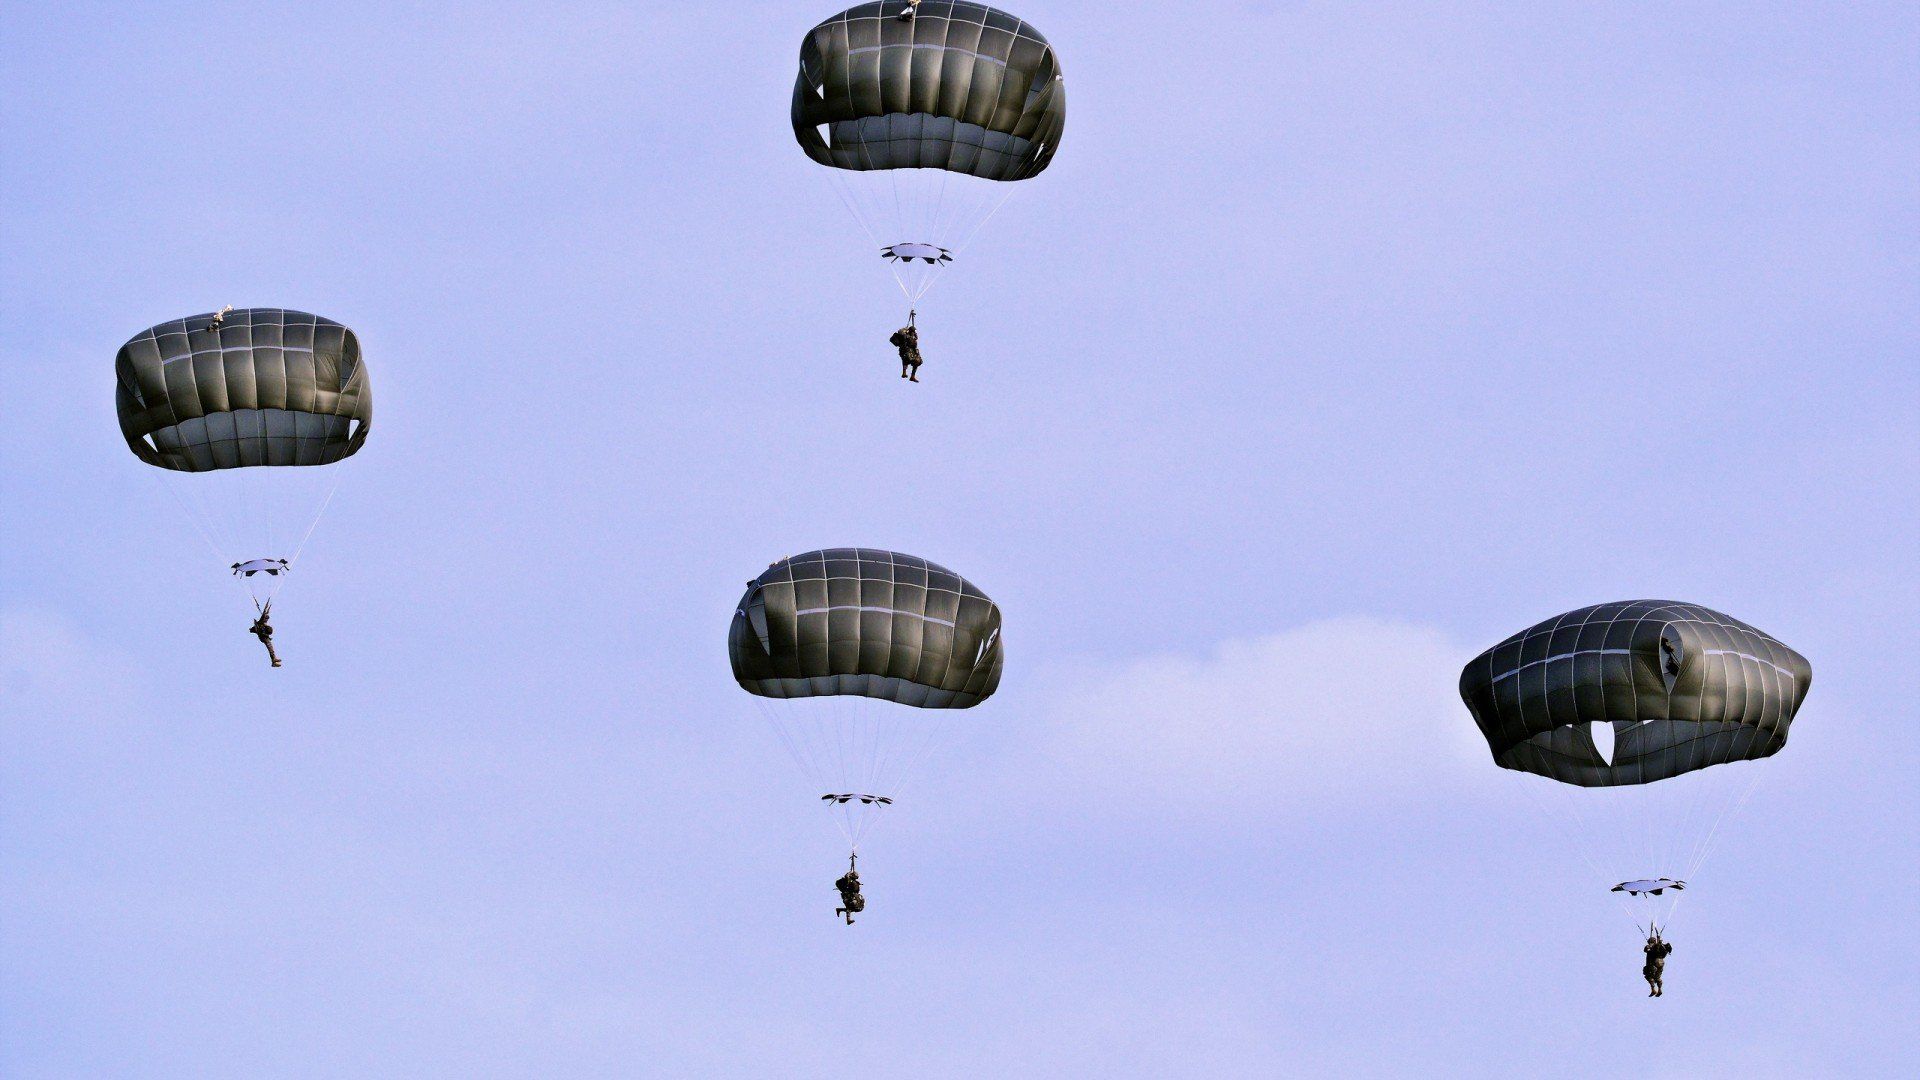 Military army paratrooper wallpaper | 1920x1080 | 506253 | WallpaperUP